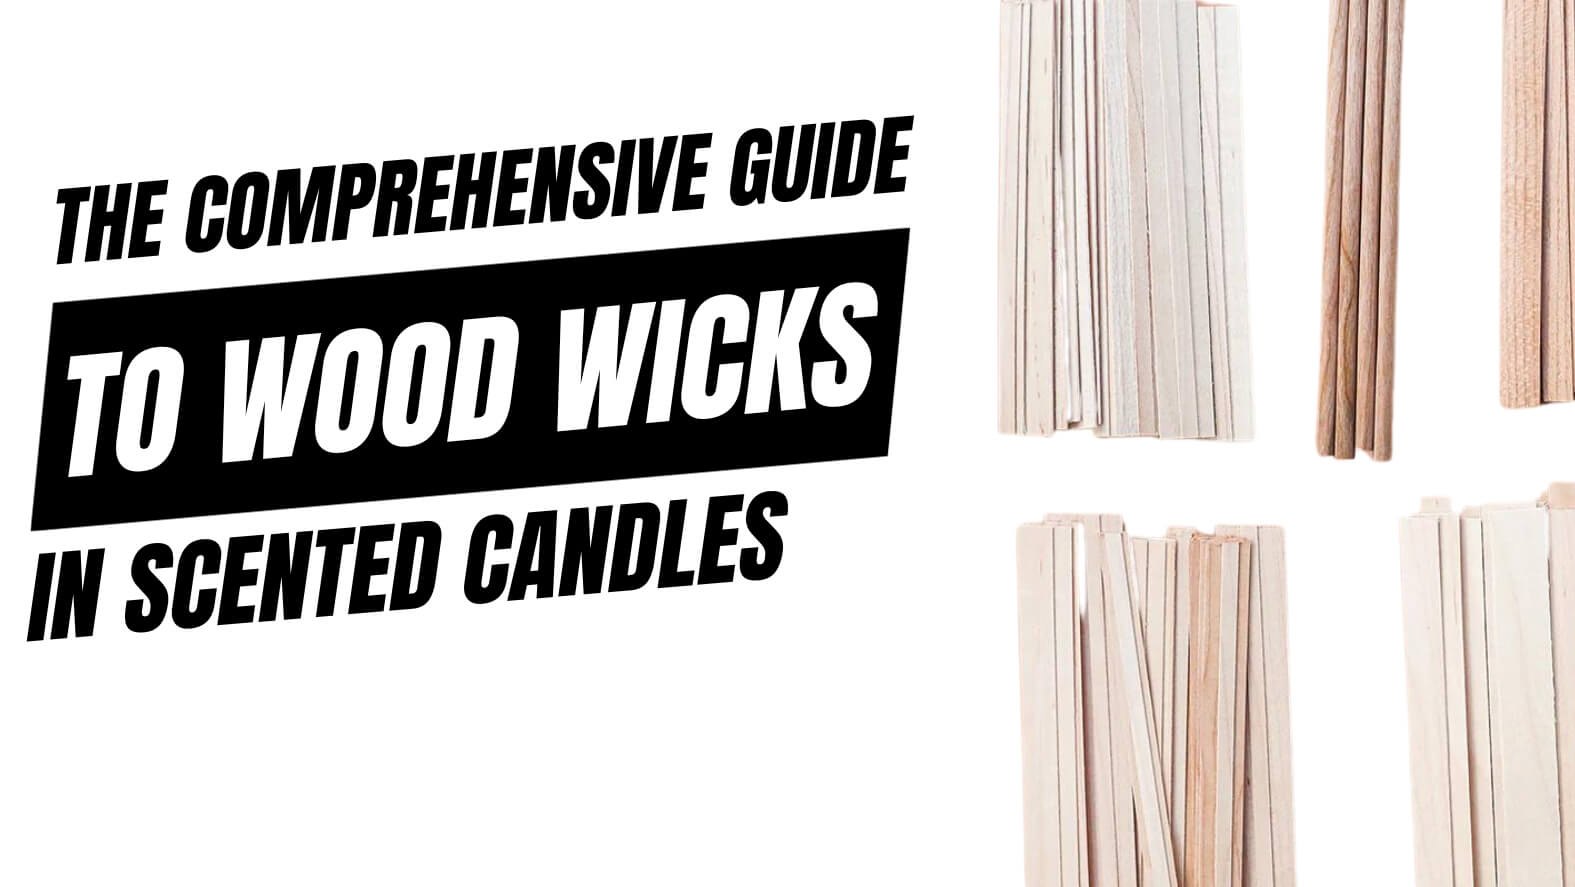 3 Things You Need to Know About Wooden Wick Candles: A Shopper's